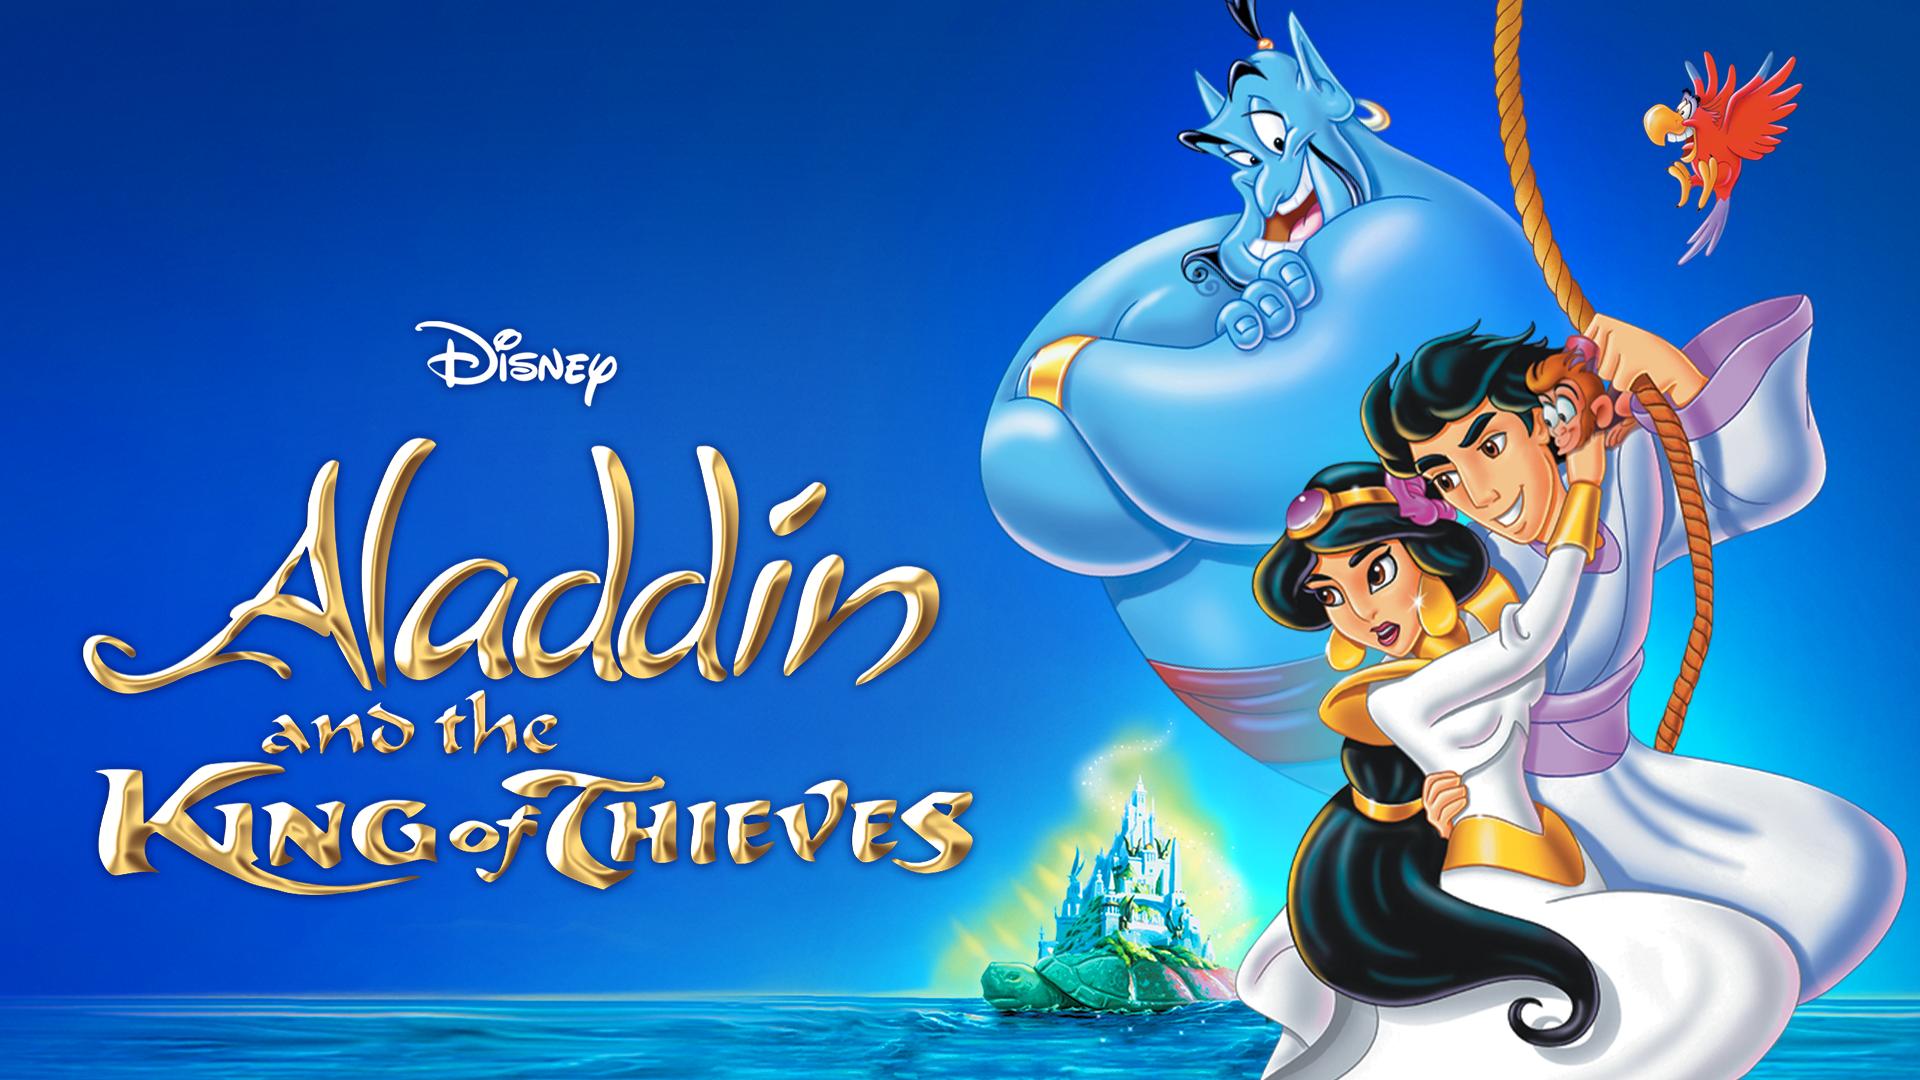 Disney On Twitter Aladdin And The King Of Thieves 1996